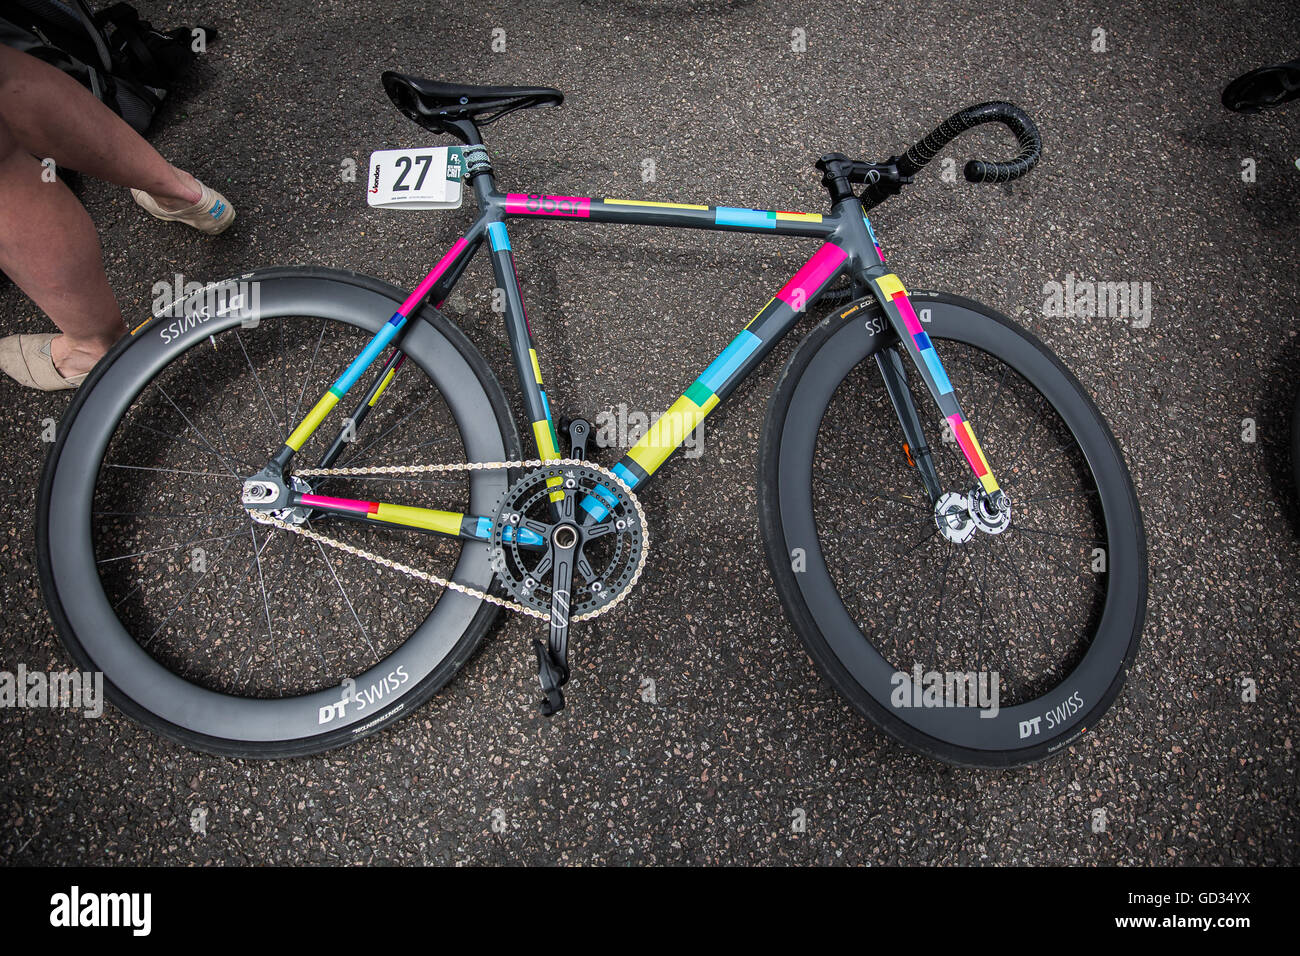 Fixed Gear Bicycle High Resolution Stock Photography and Images - Alamy